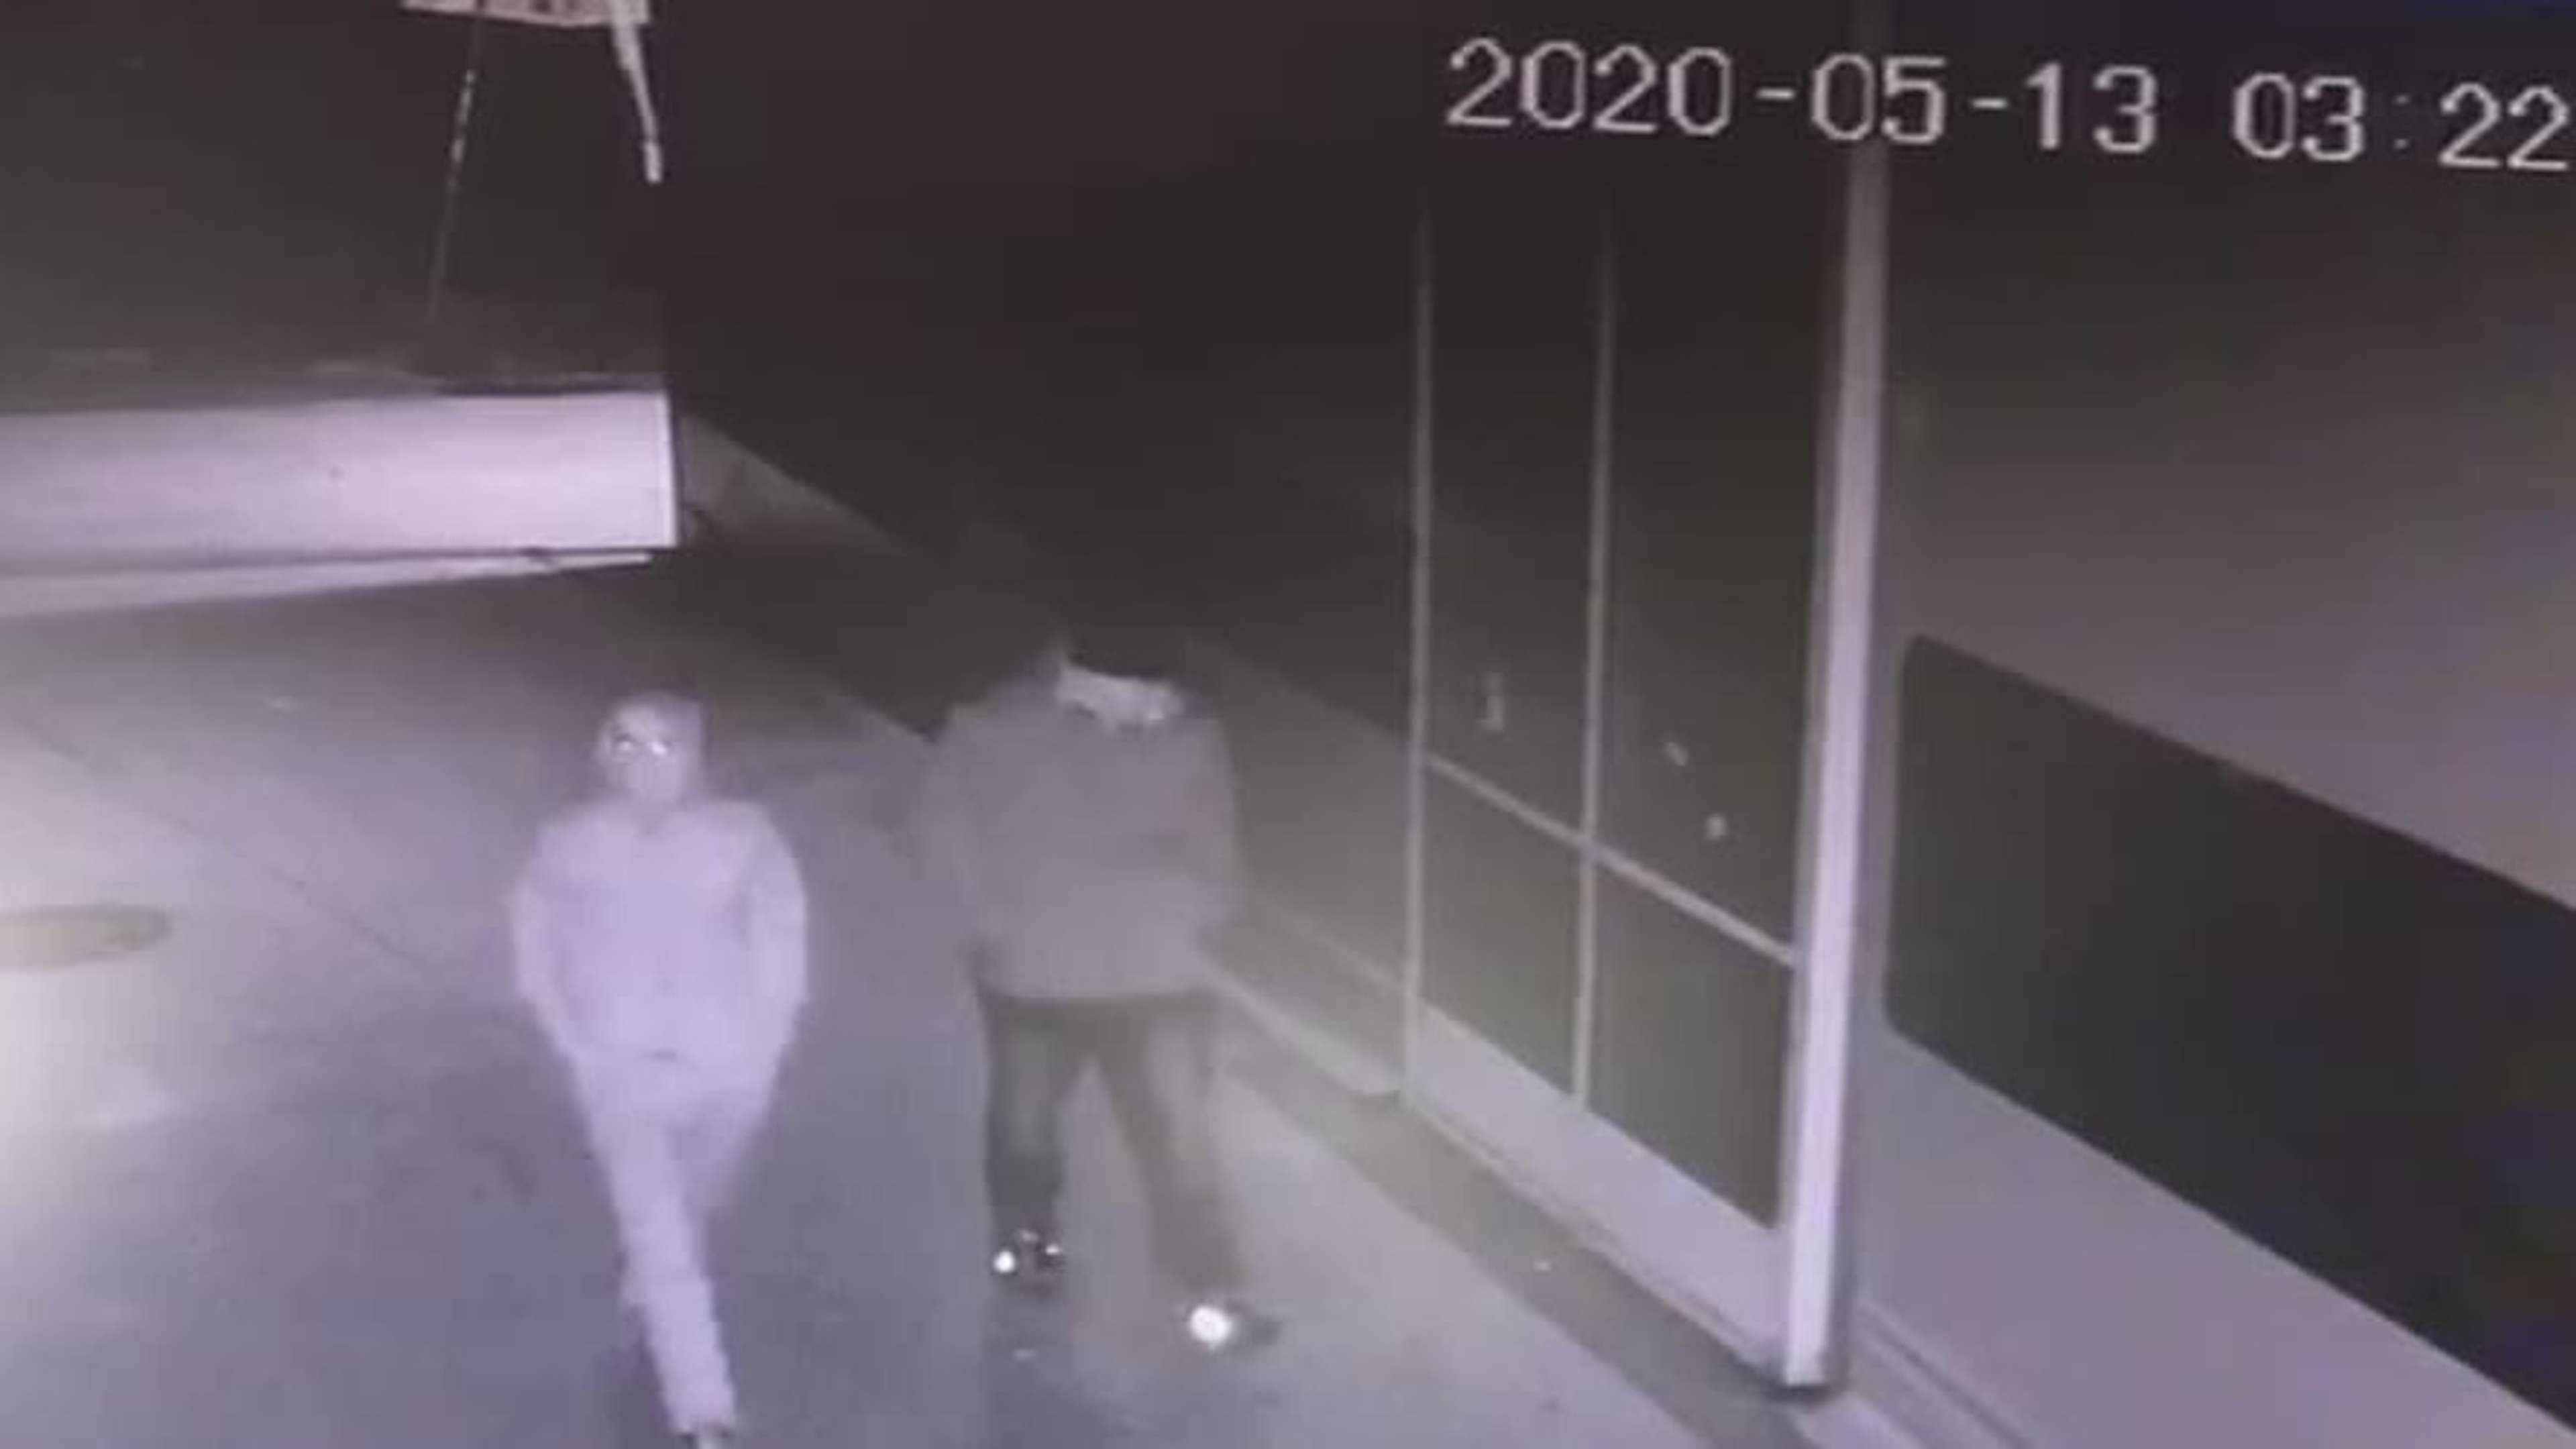 EMBED ONLY LASK CCTV footage